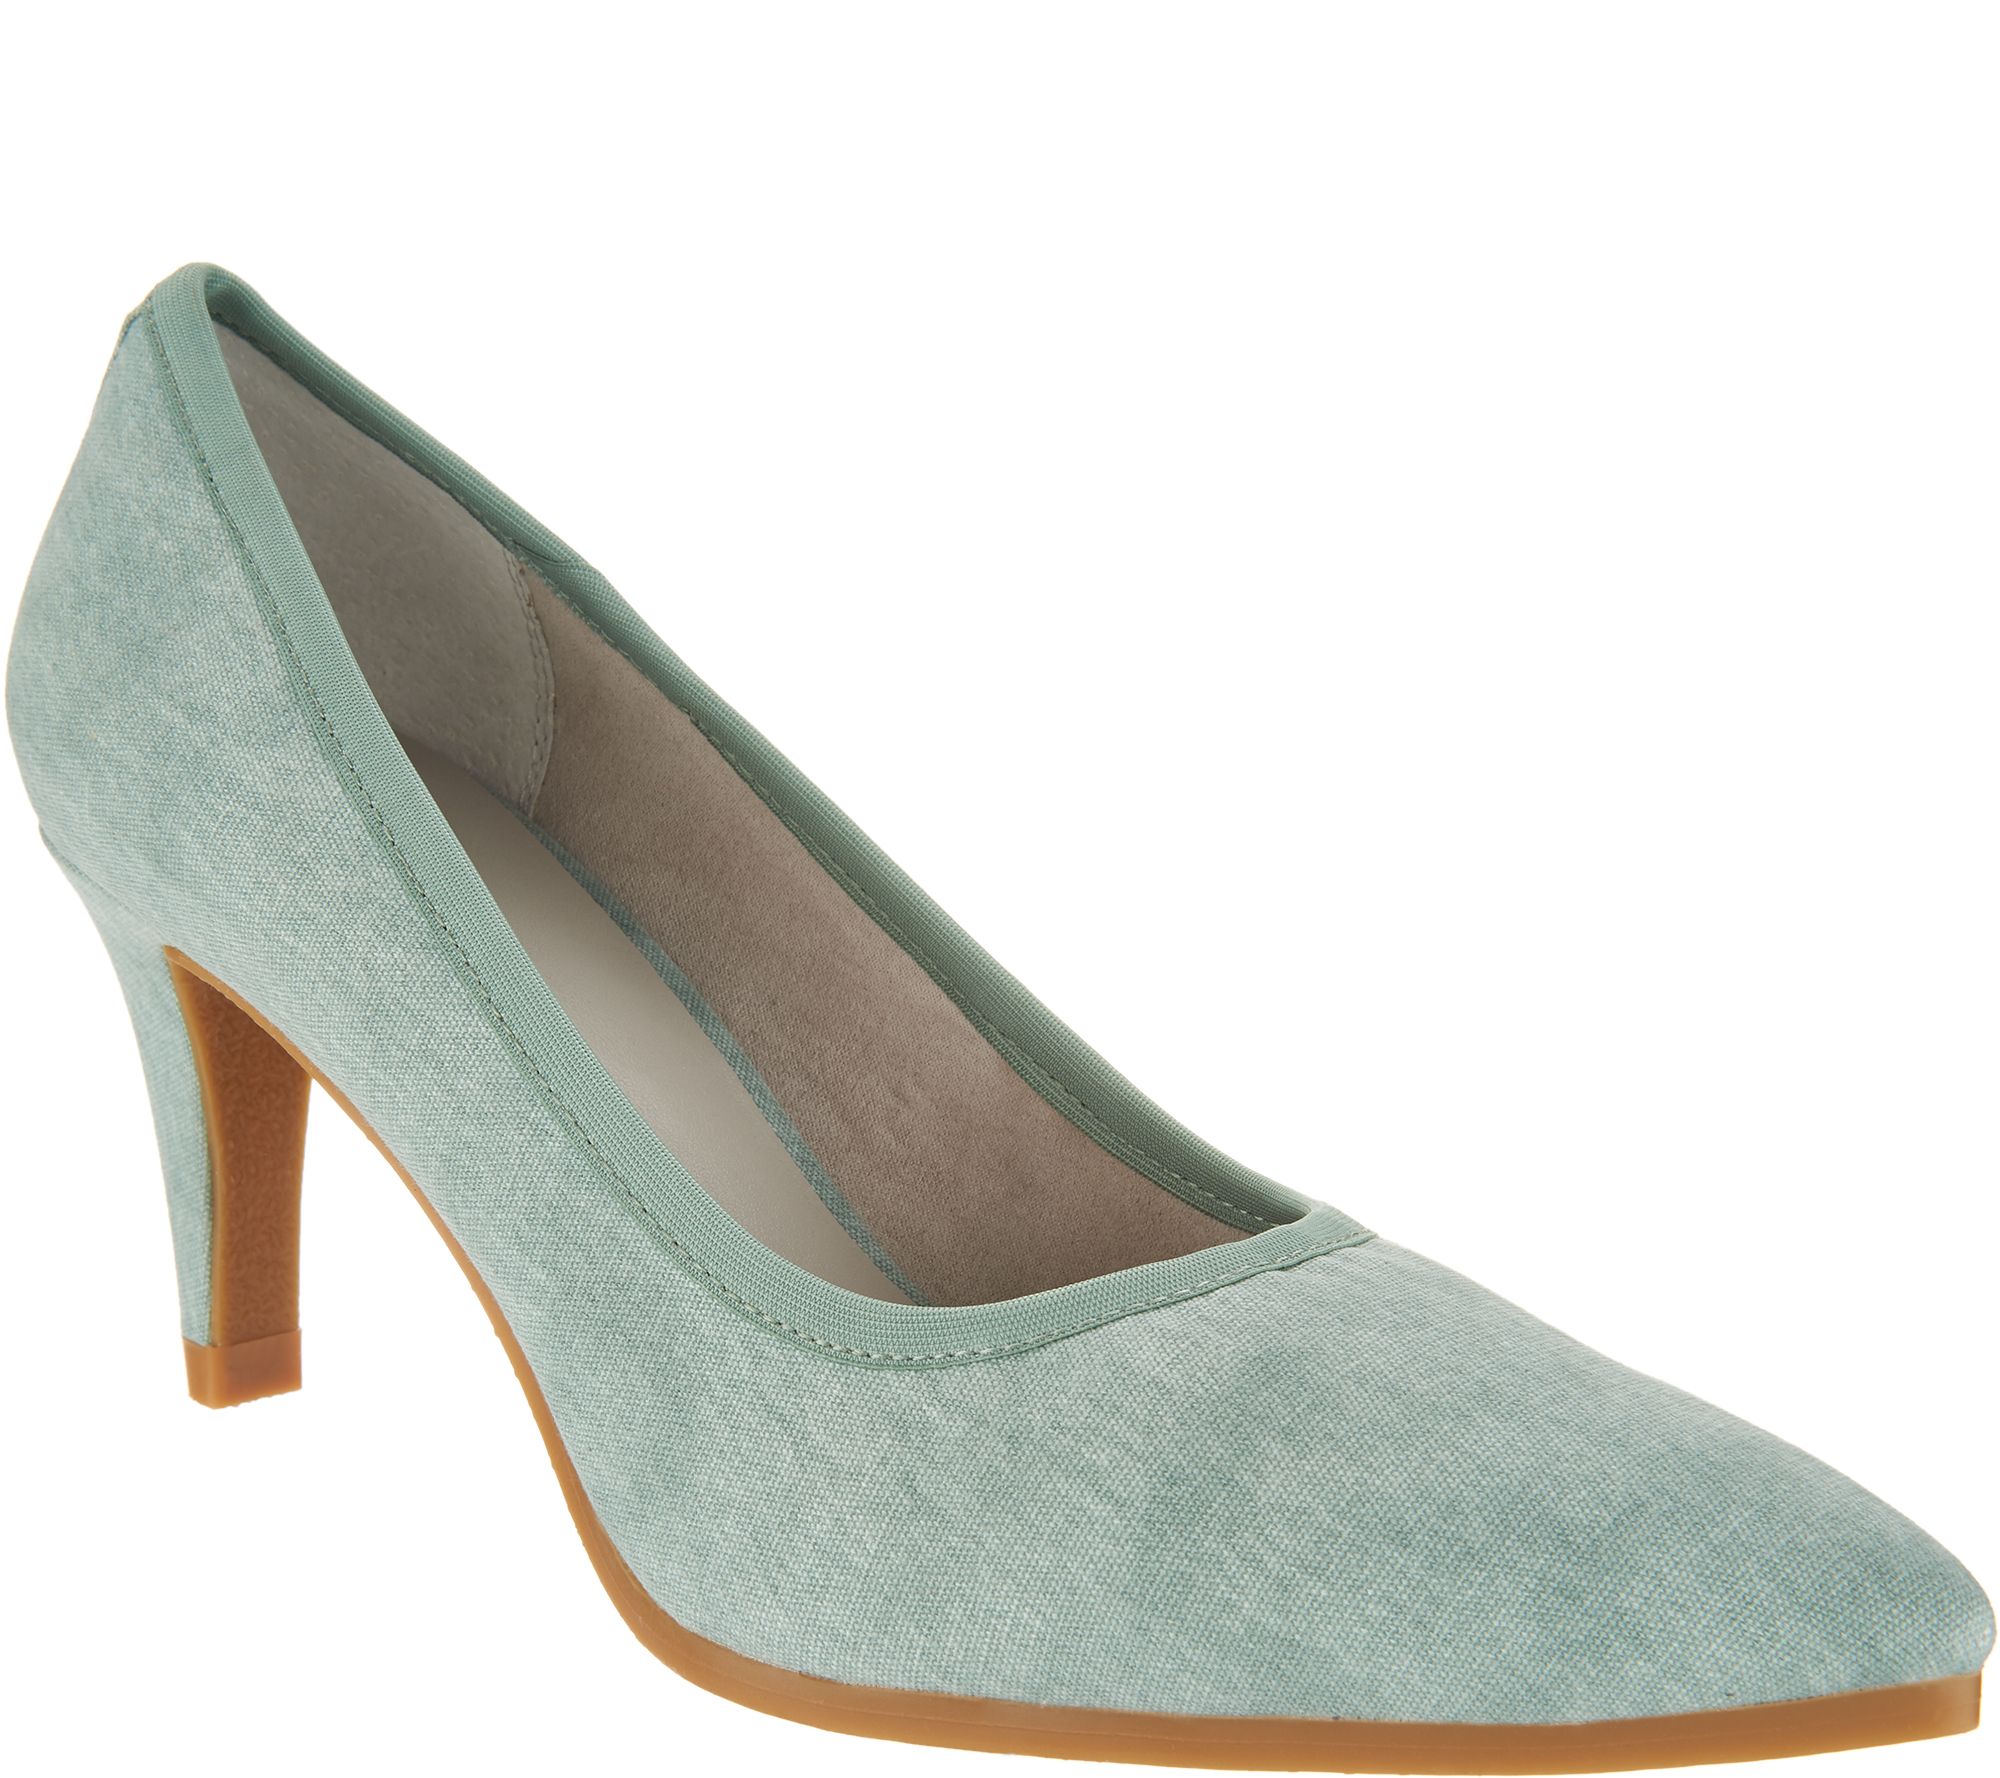 Lori Goldstein Collection Washed Linen Pumps with Crepe Bottom - QVC.com